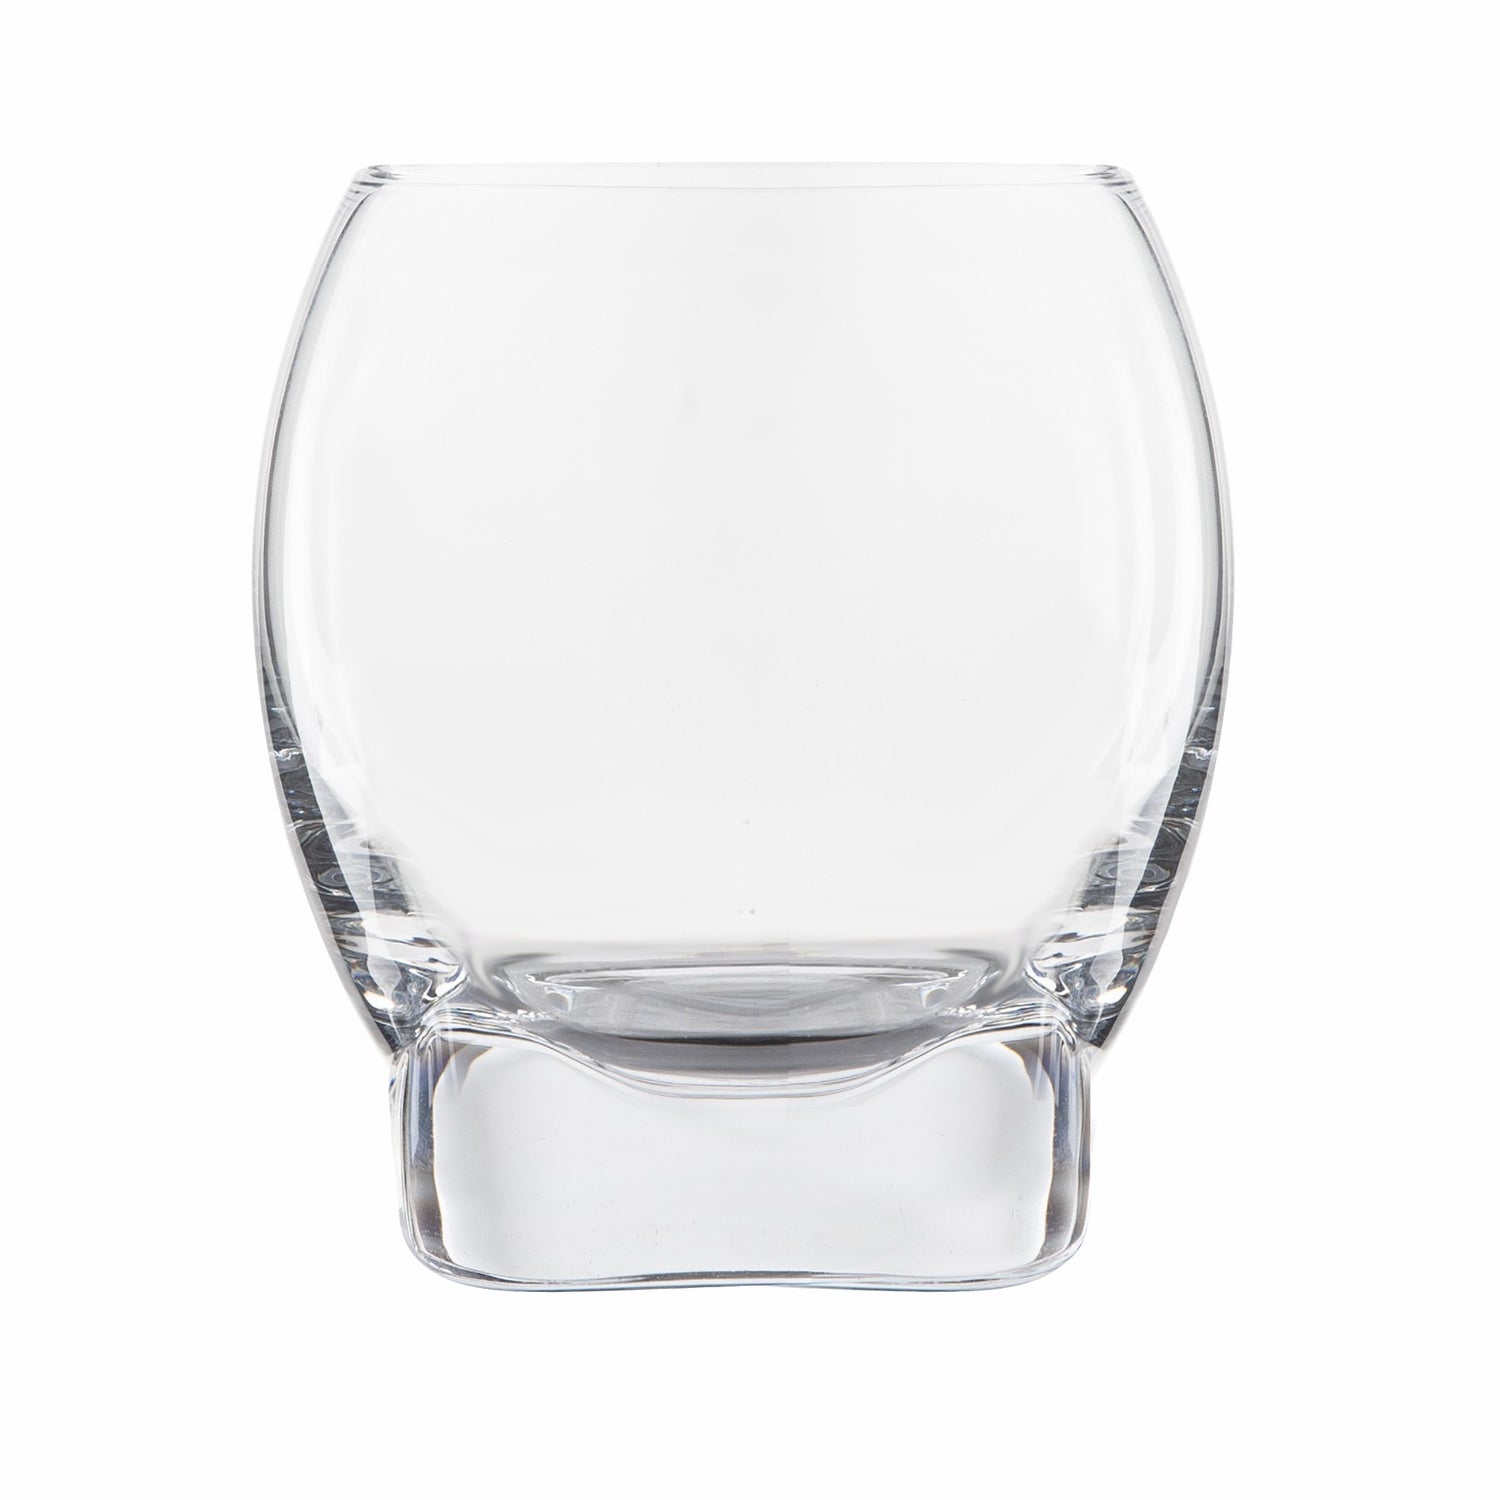 Bartender's Collection Colossal Ice Cube Whiskey Glass